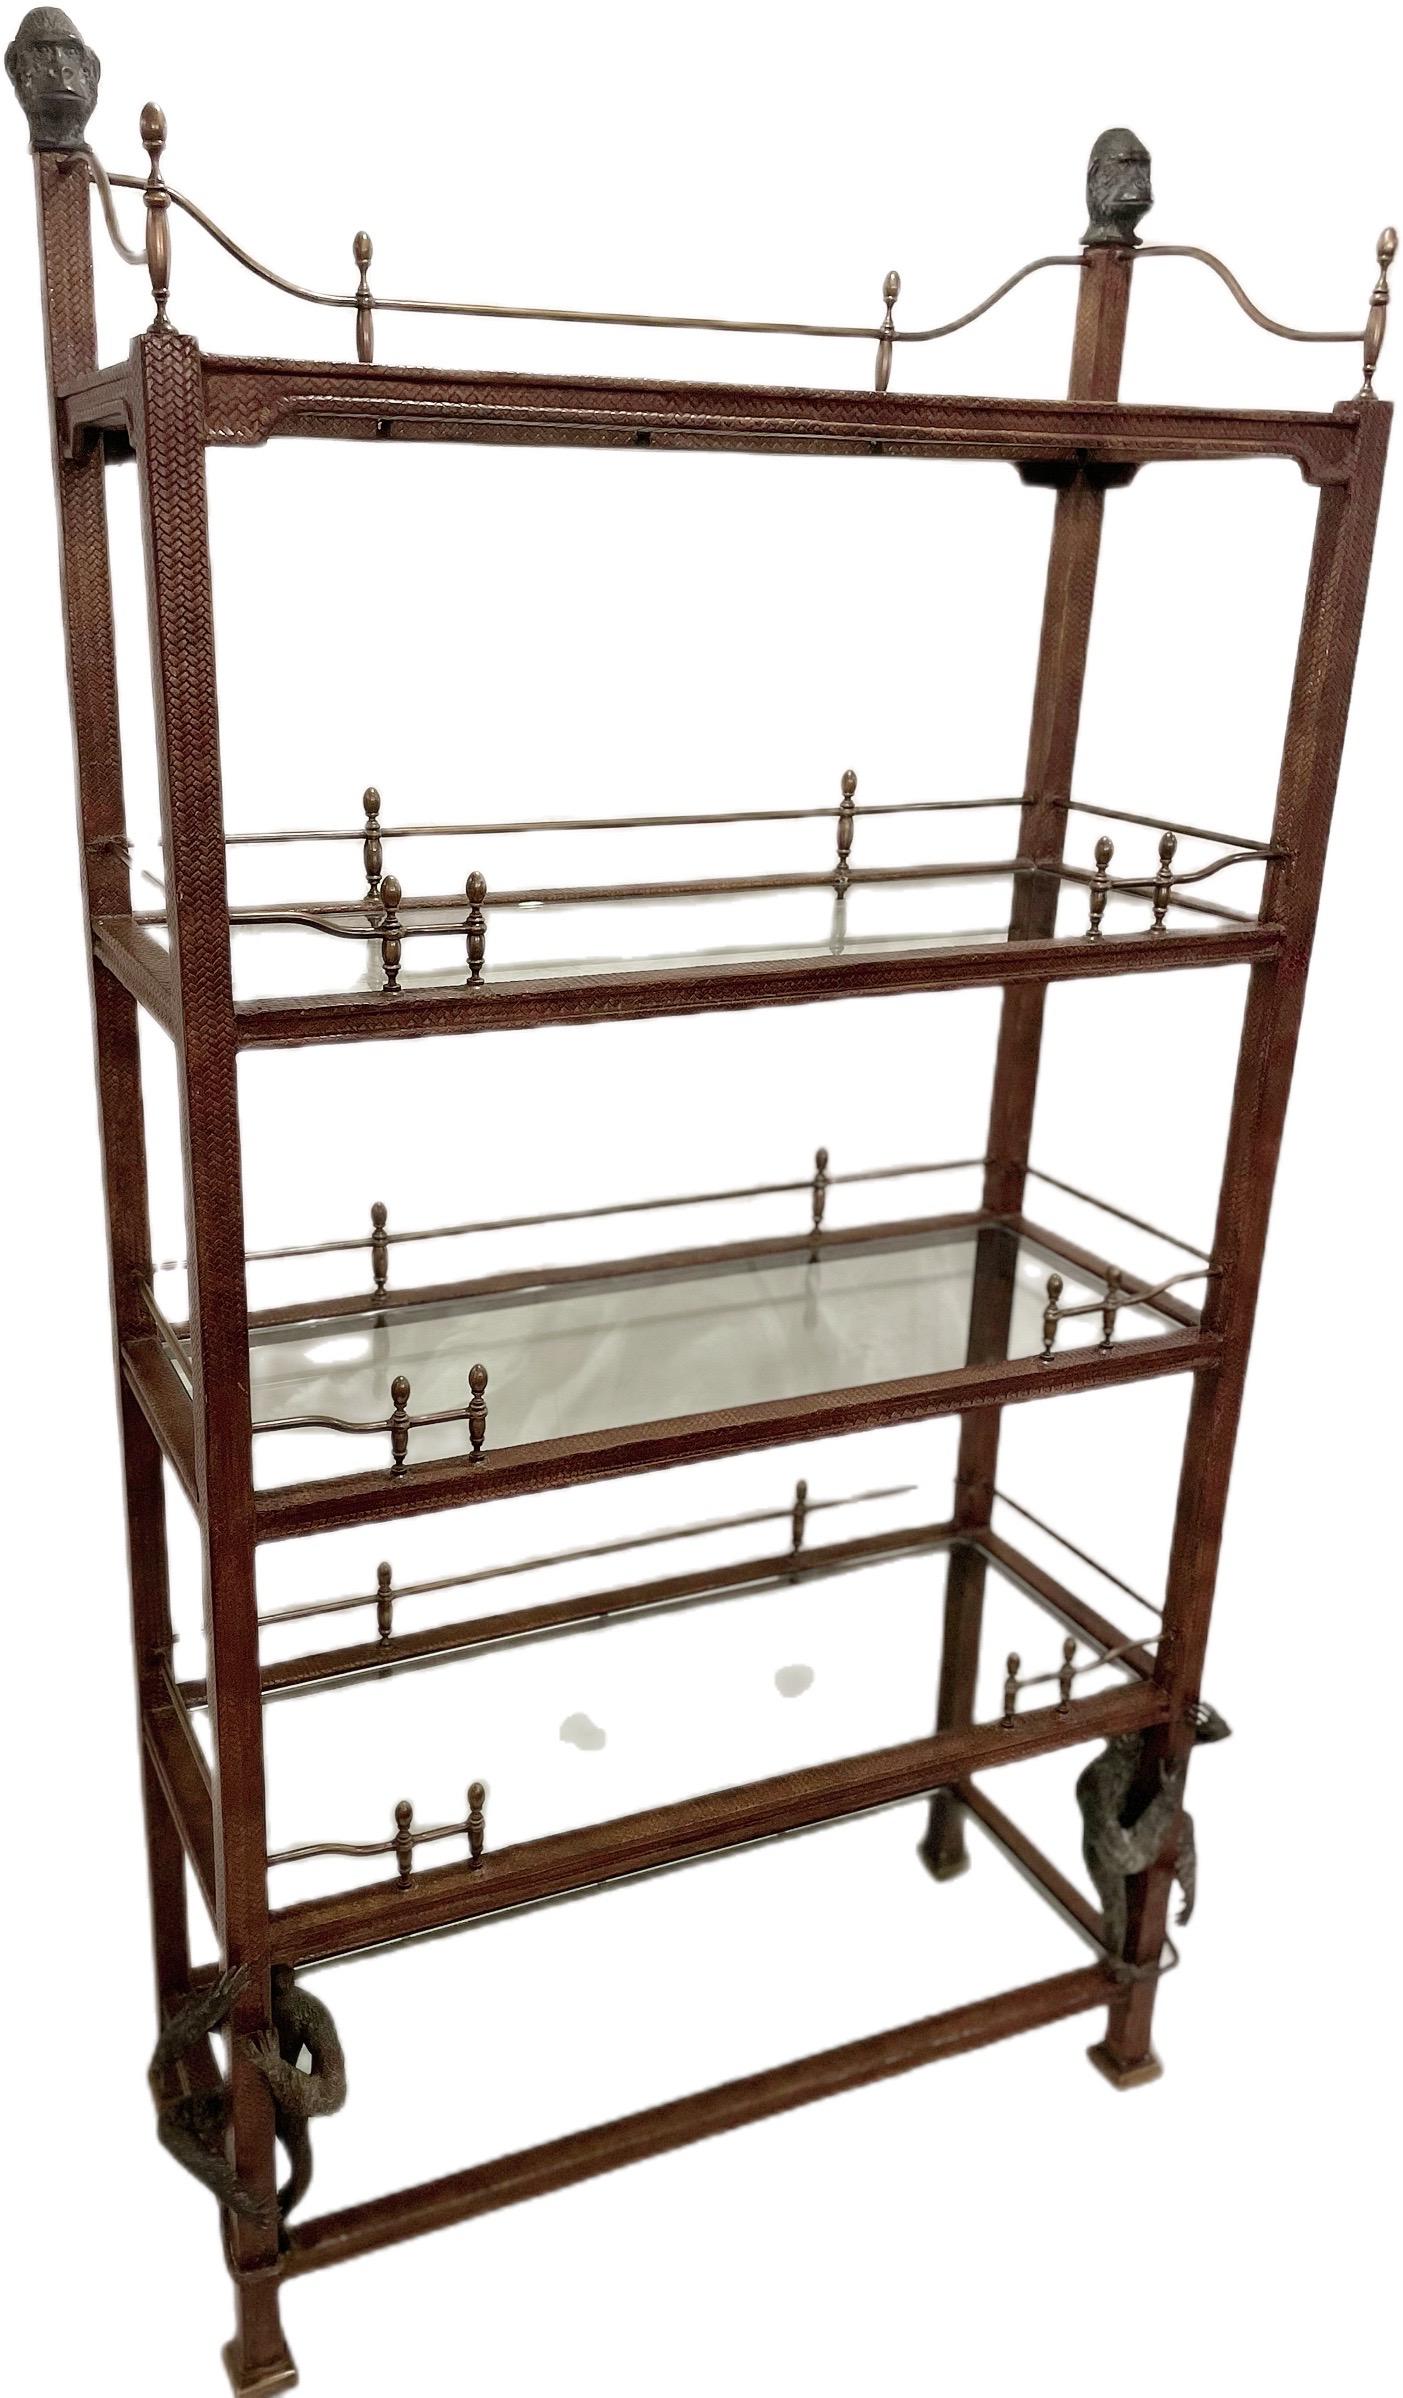 Extremely rare and exquisitely crafted Maitland -Smith late 20th Century Sculpted Monkey Bookcase Etagere with 5 shelves. Glass shelves are extremely thick and heavy, coming in at about 3/8 inch thick glass. The dimensions are 43.5